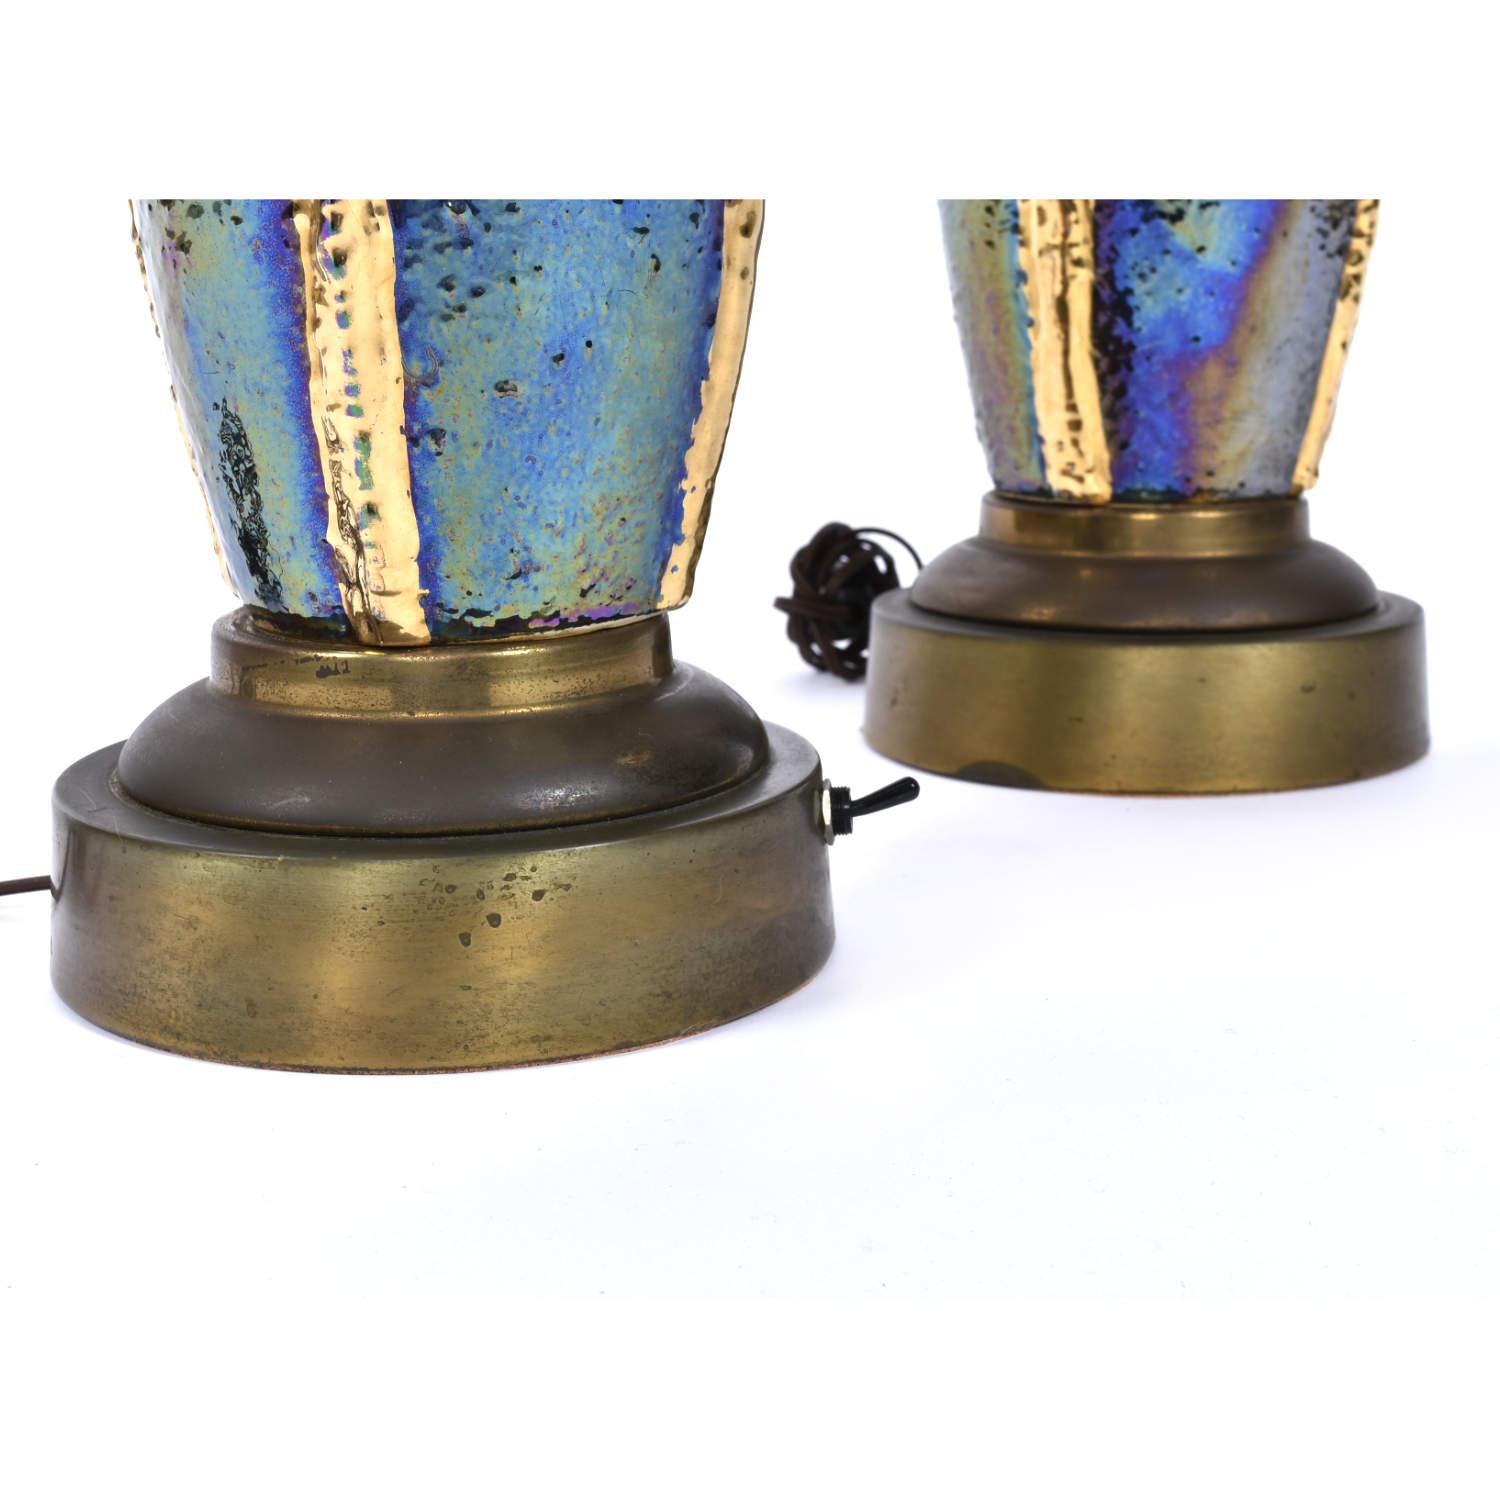 Mid-20th Century Pair of Iridescent Blue and Gold Mid-Century Modern Urn Shaped Ceramic Lamps For Sale